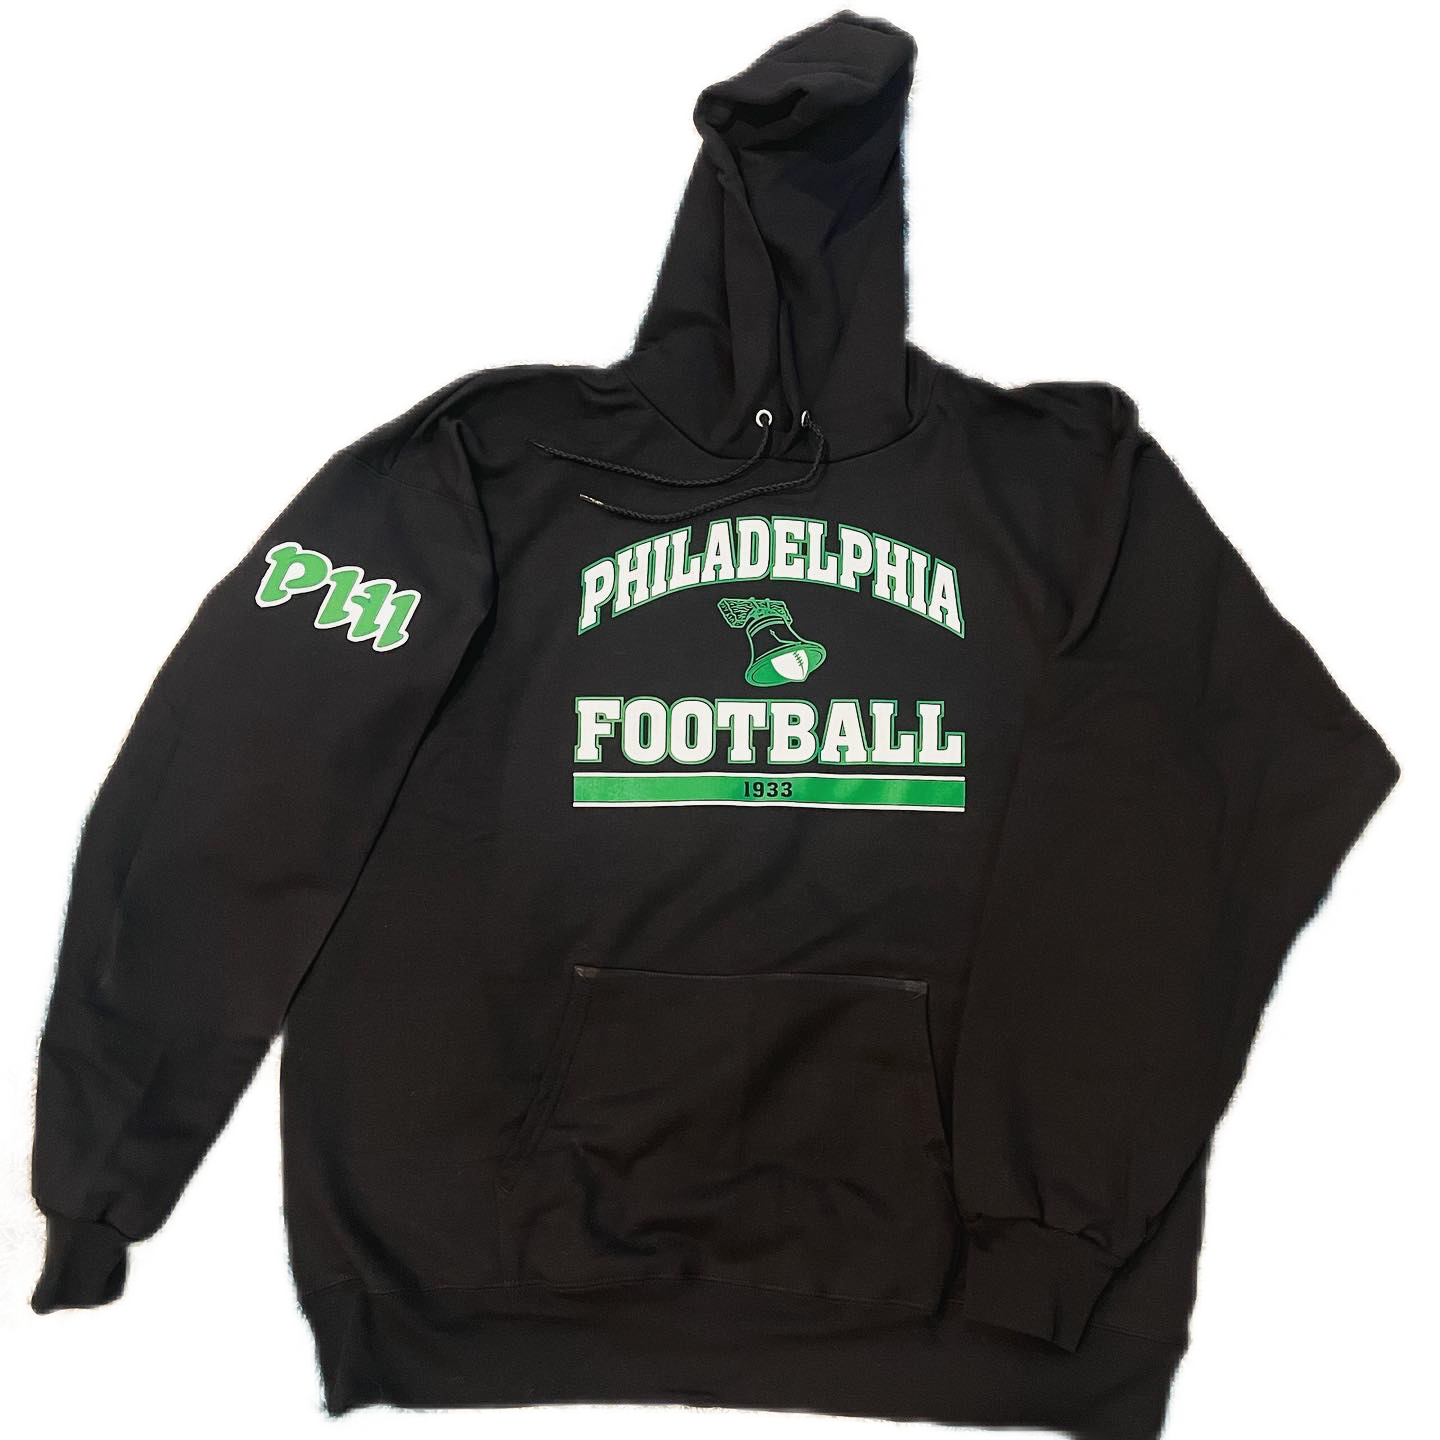 Philadelphia Football Arched- black hoodie with patch